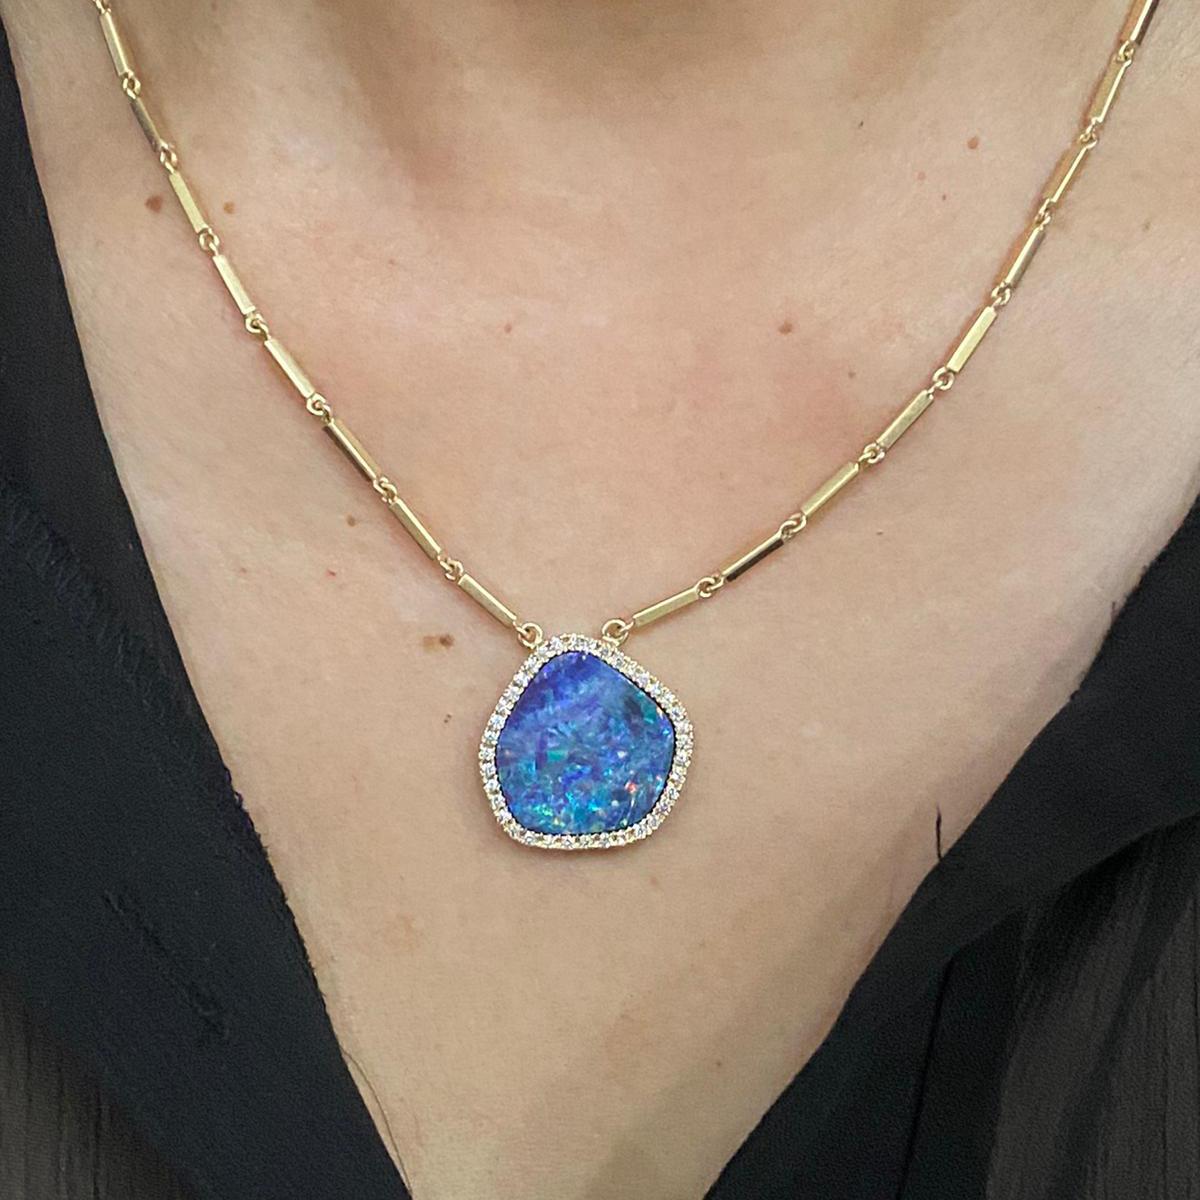 Opals are perhaps the most colorful of gemstones and this unique stone is a great example.
The 11 carat opal is surrounded by 0.37cts of Diamonds and on a hand made, solid gold chain.  Chain length can be customized and is a great example of Nancy's